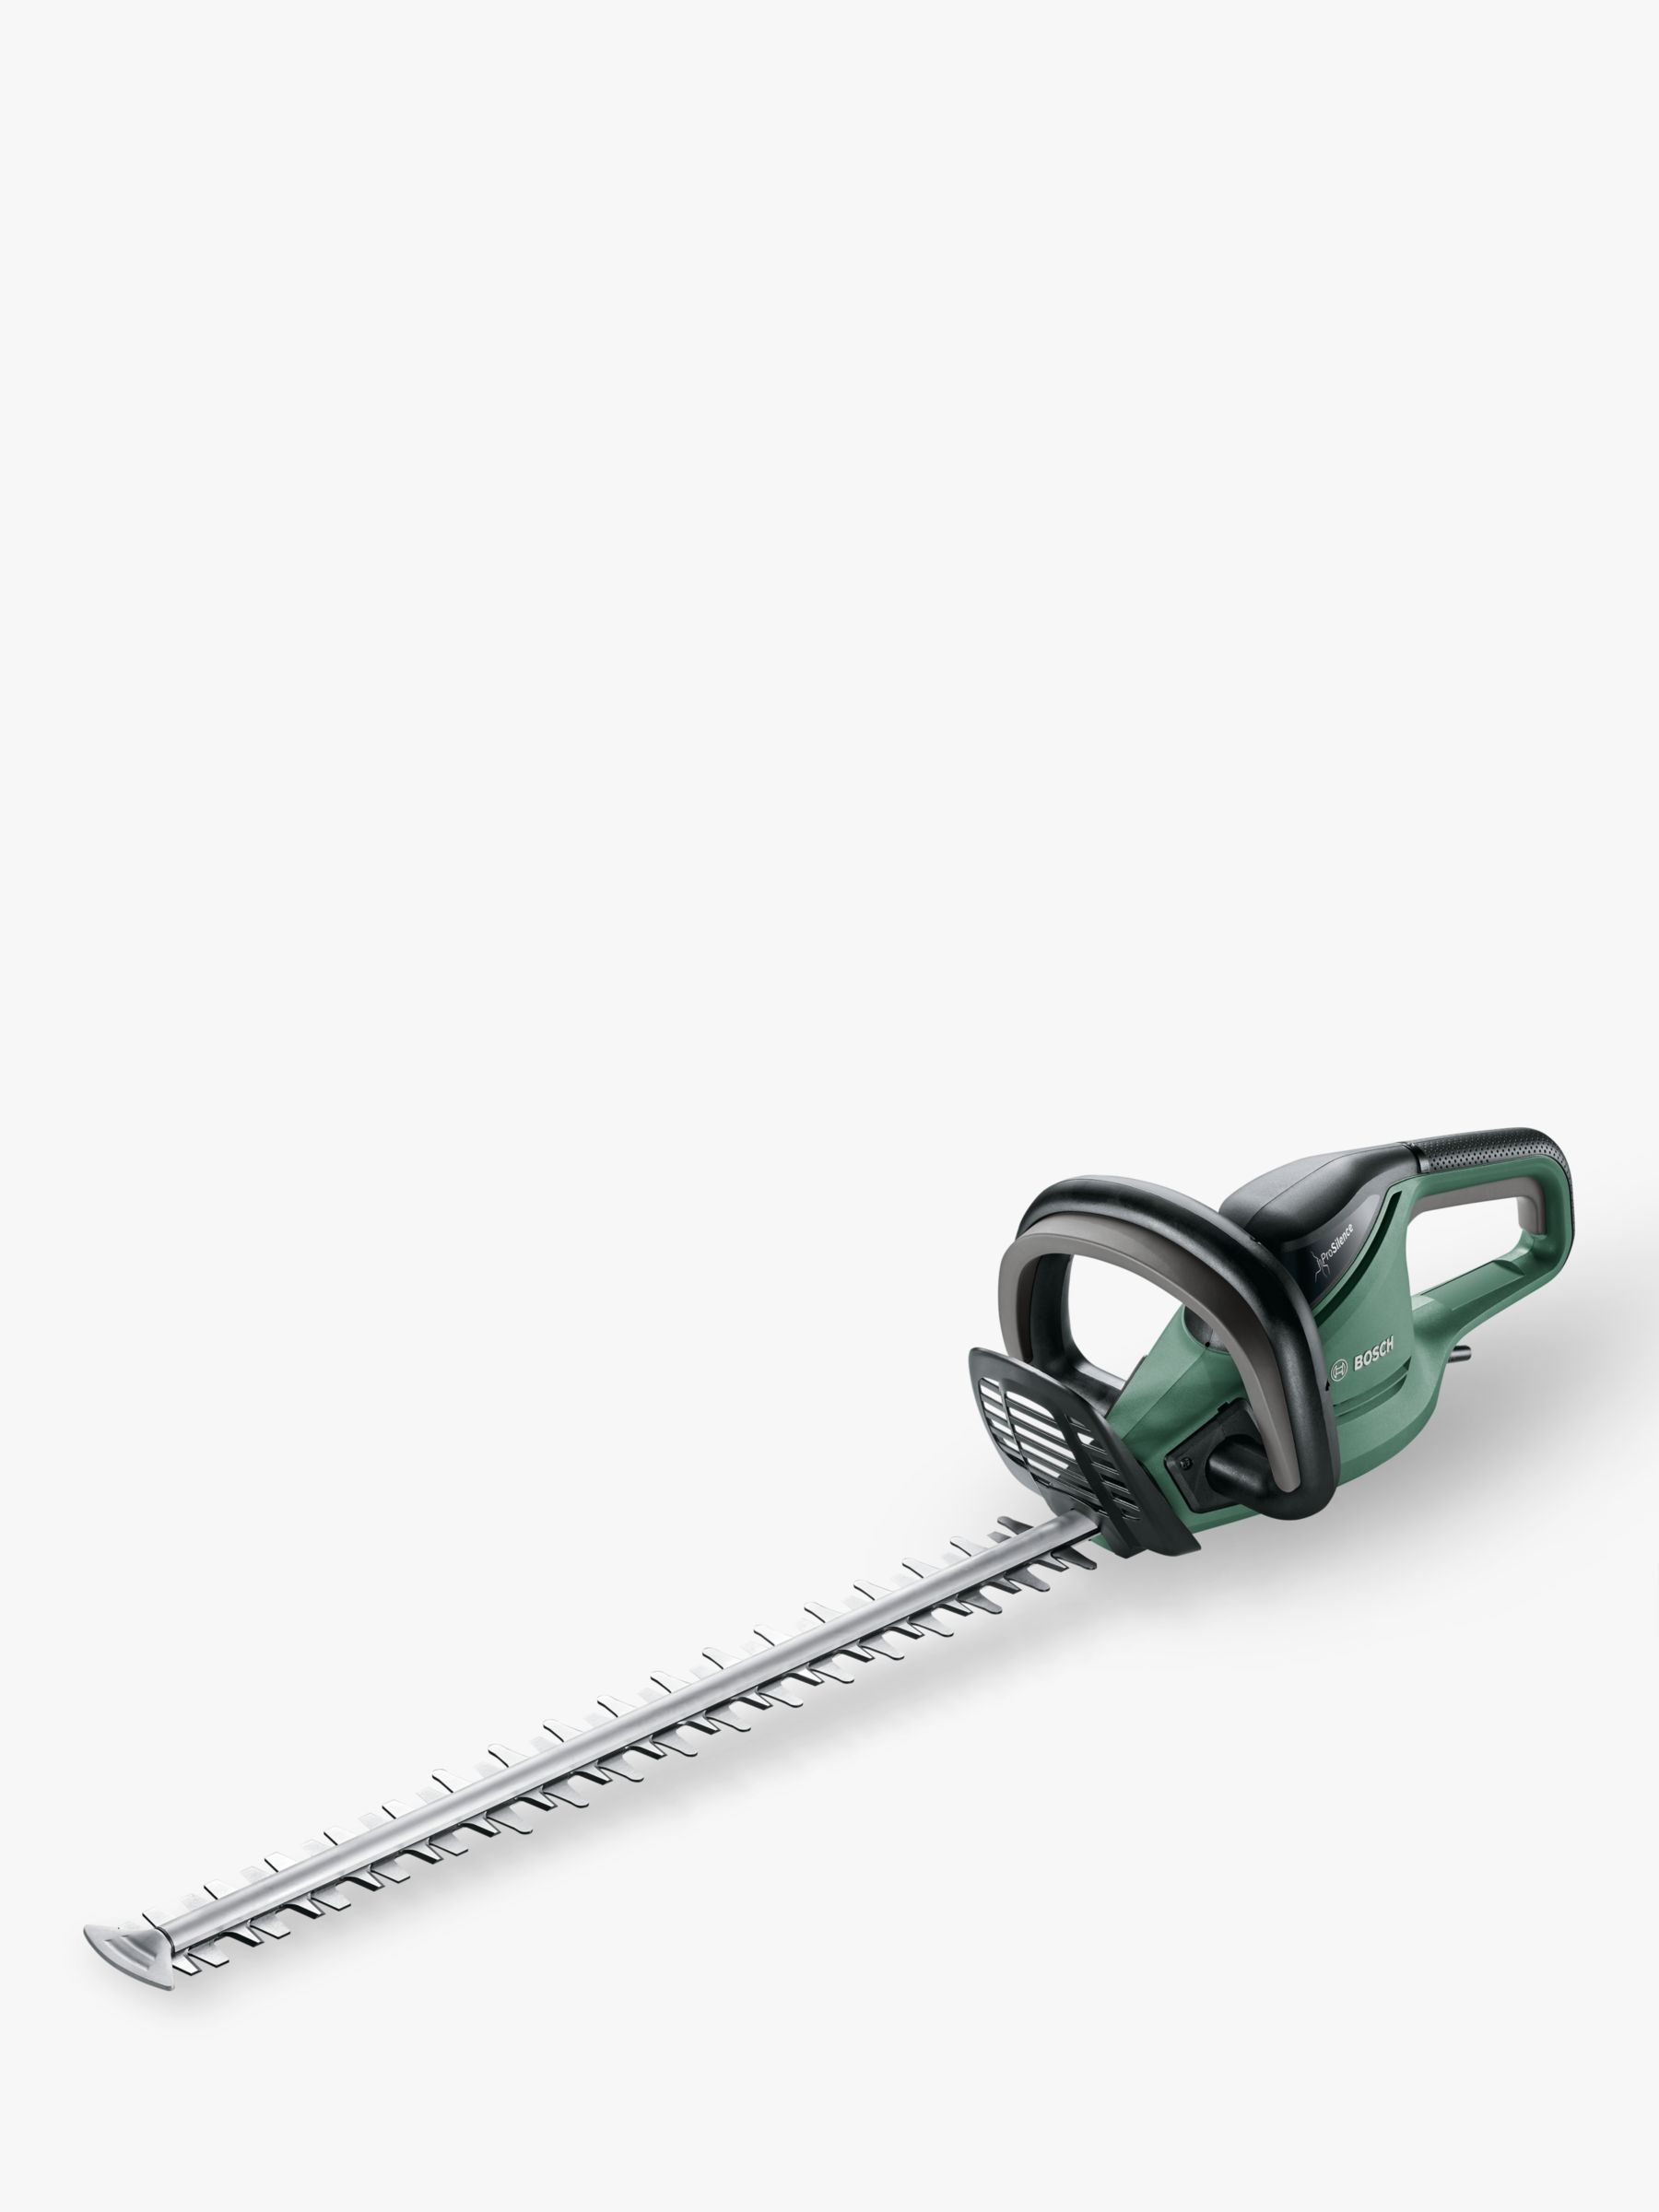 bosch electric hedge trimmer